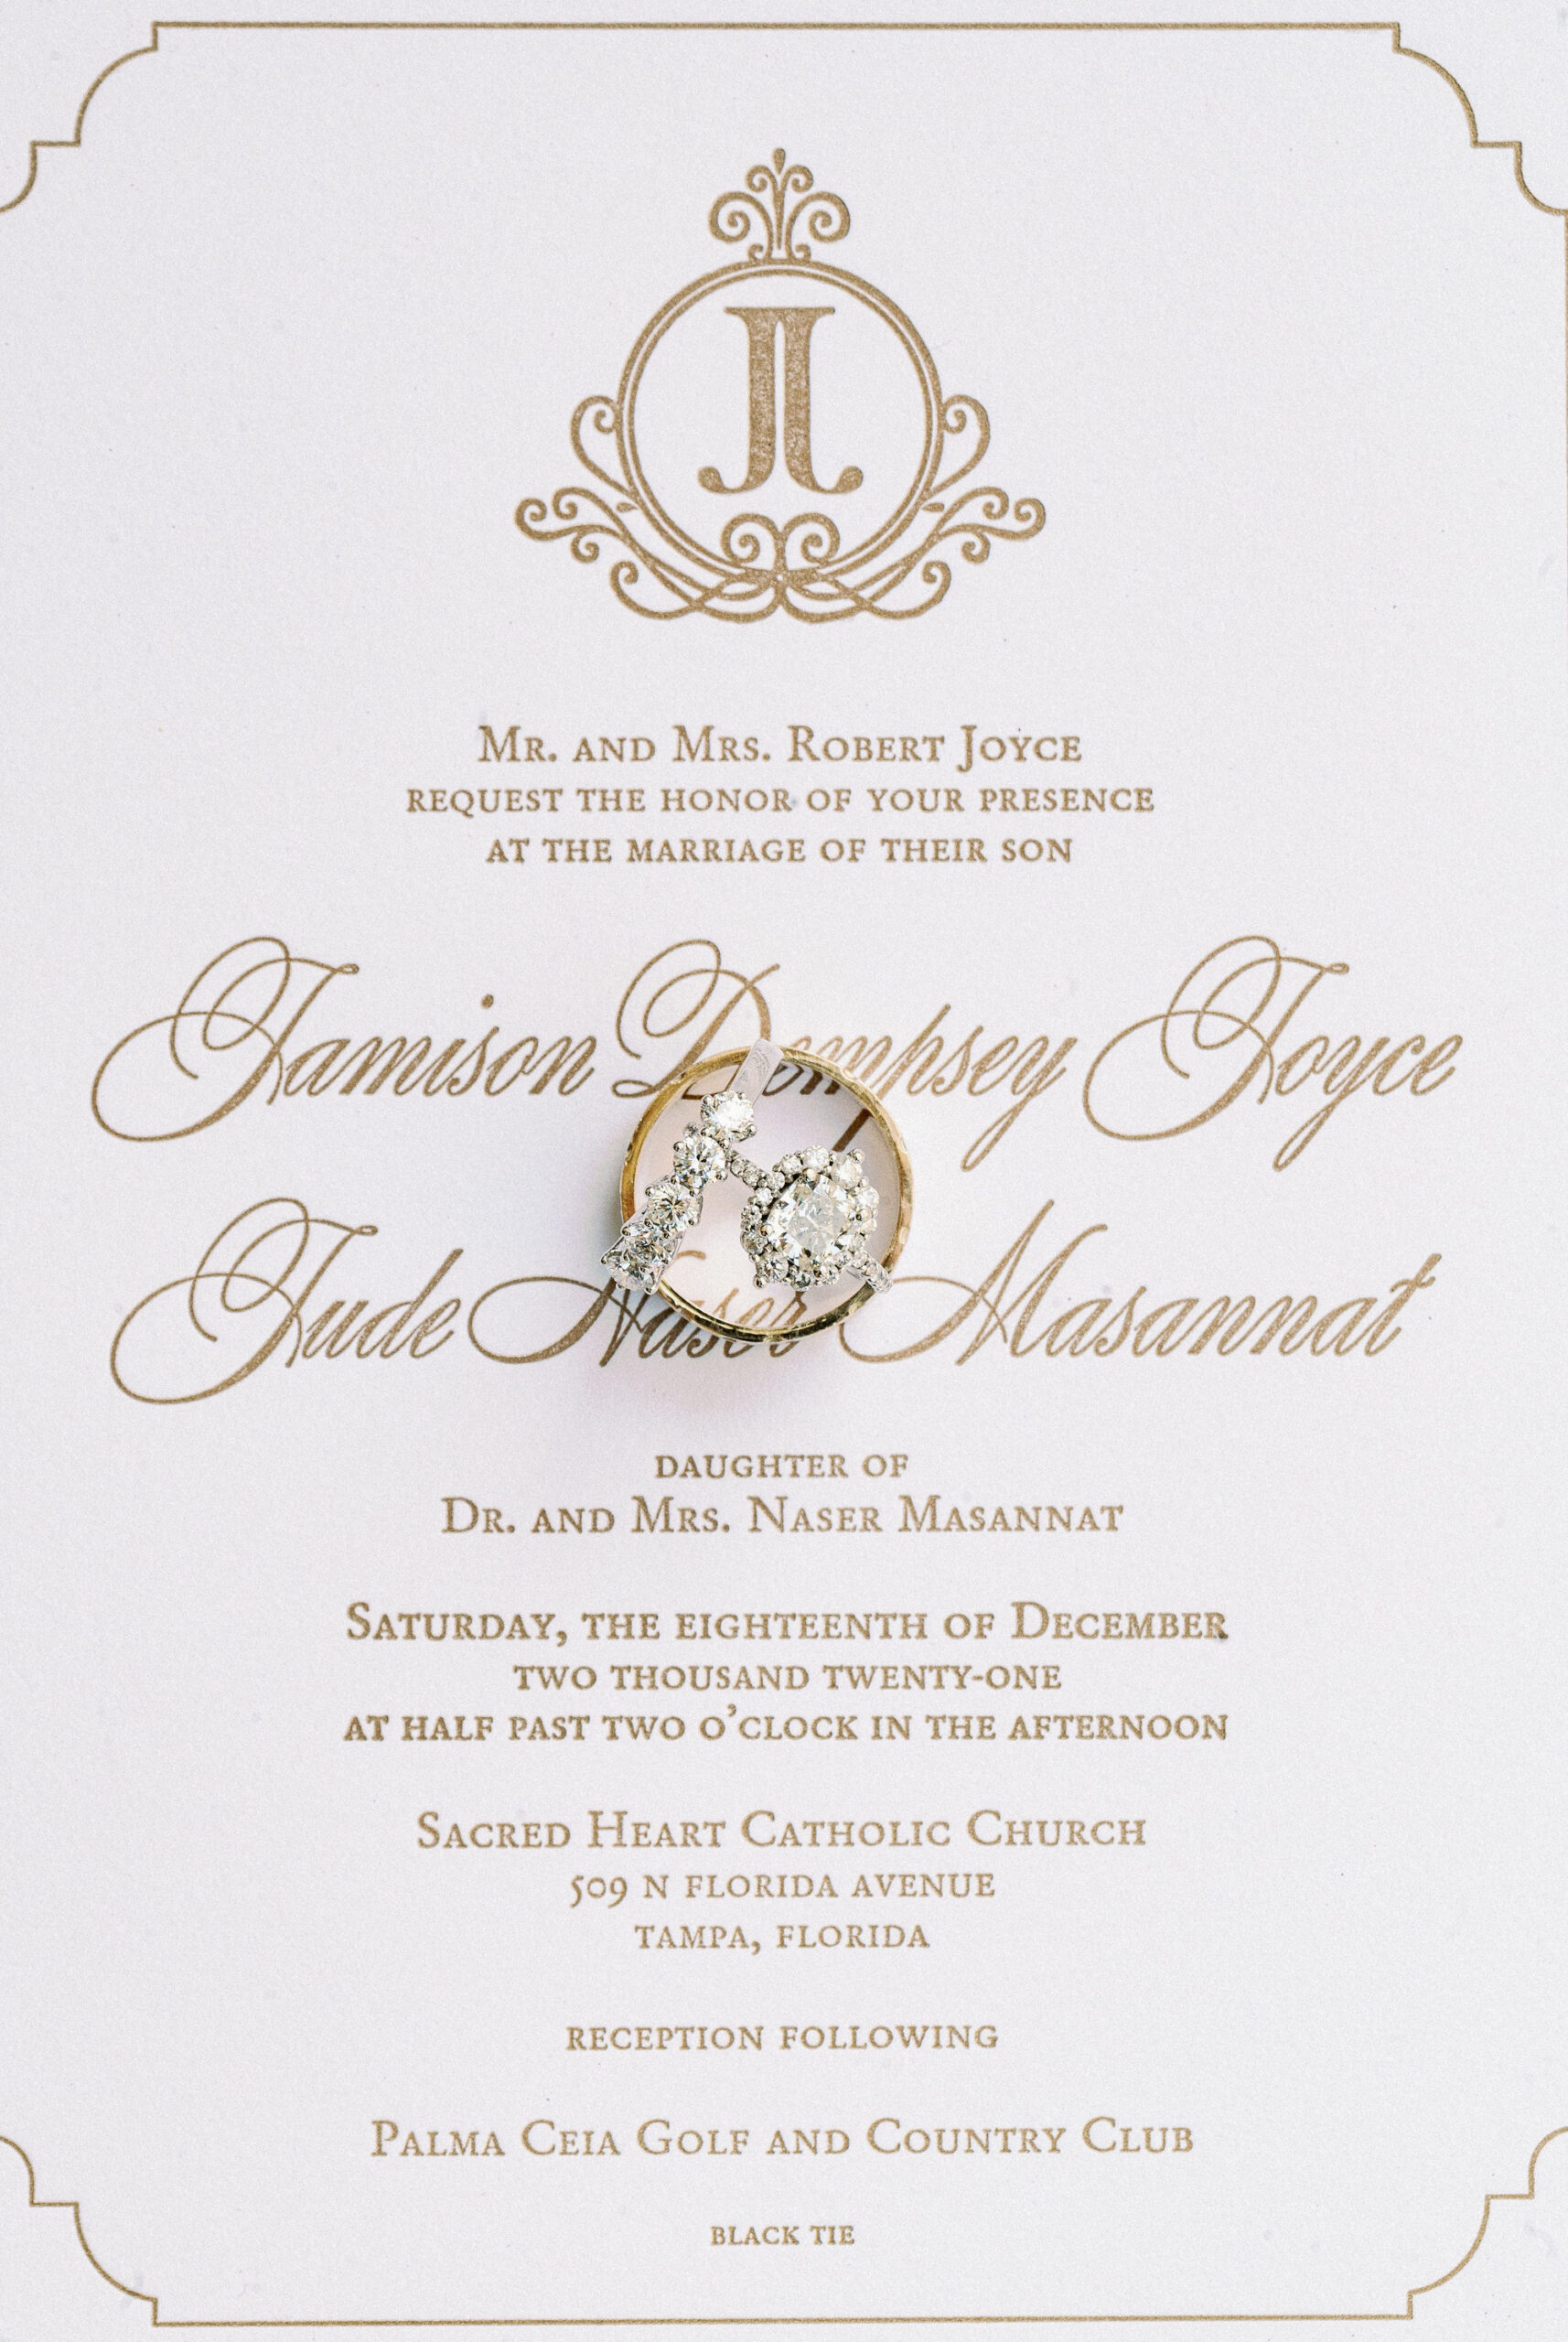 Classic White and Gold Wedding Invitation Idea | Square Cut Vintage Engagement Ring and Round Diamond Wedding Band